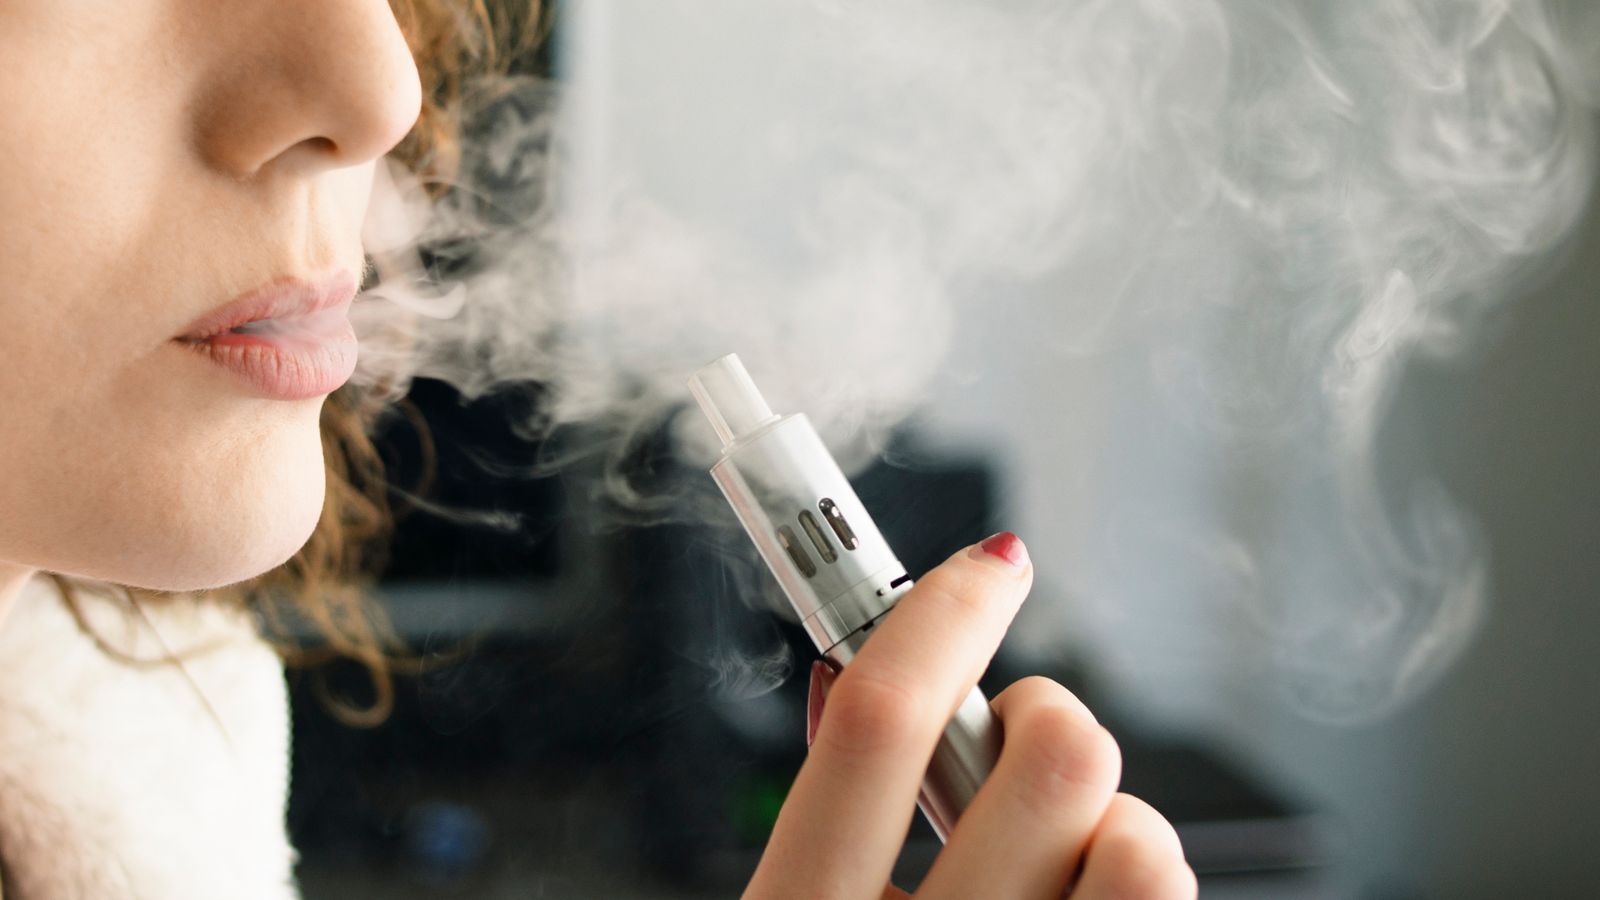 Vaping: Govt to launch 'enforcement squads' in crackdown on illegal e-cigarette sales